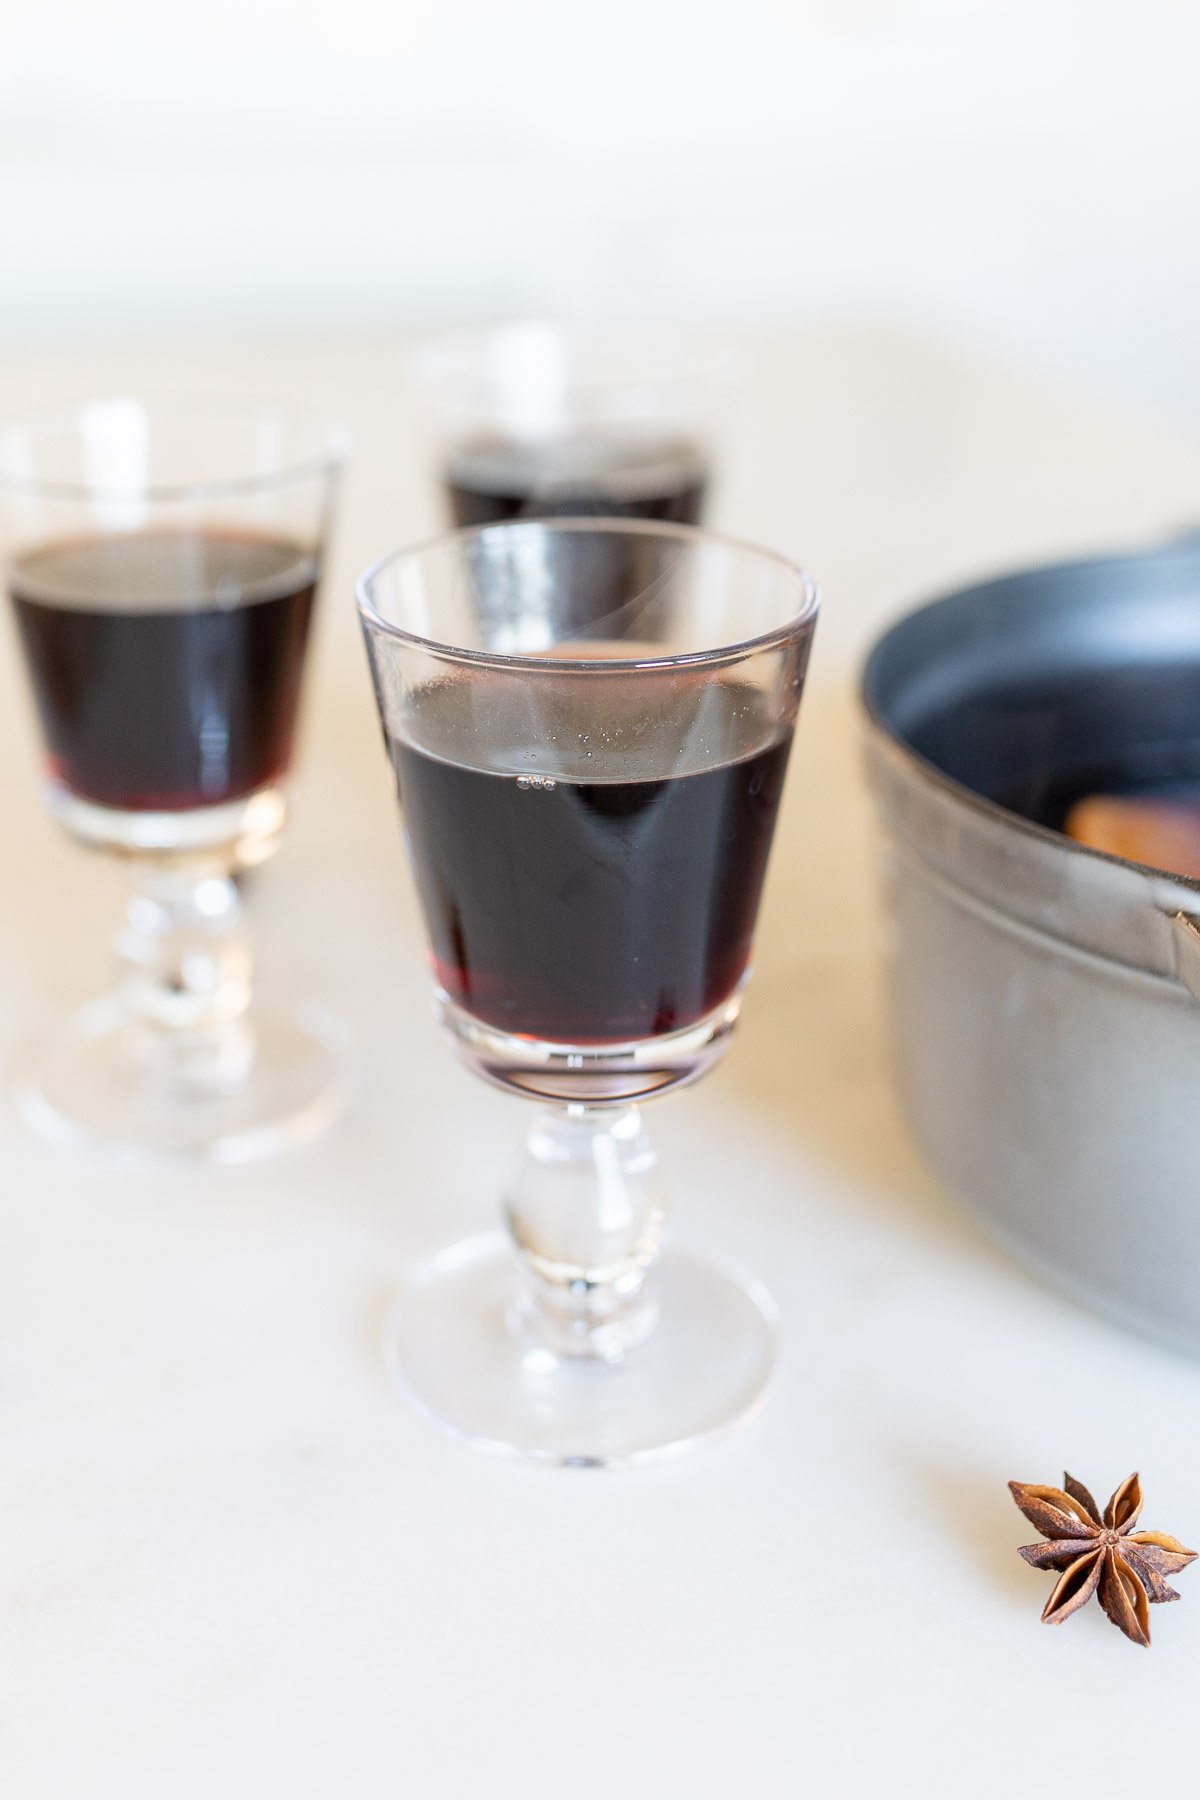 Warm and spiced mulled wine perfect for Thanksgiving, infused with anise and star anise.